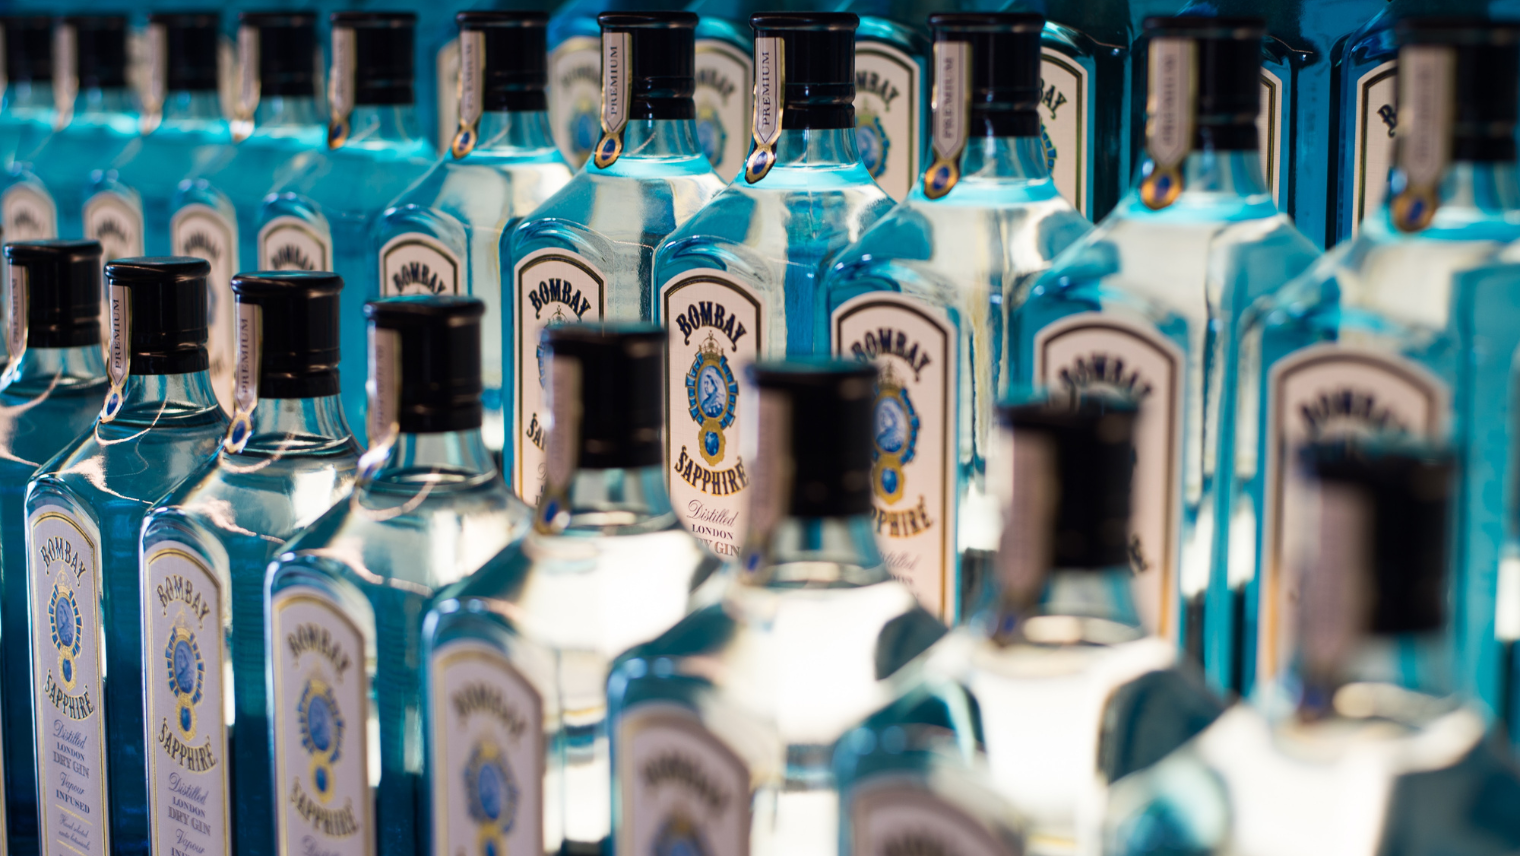 Image of multiple Bombay Sapphire gin bottles lined up next to each other